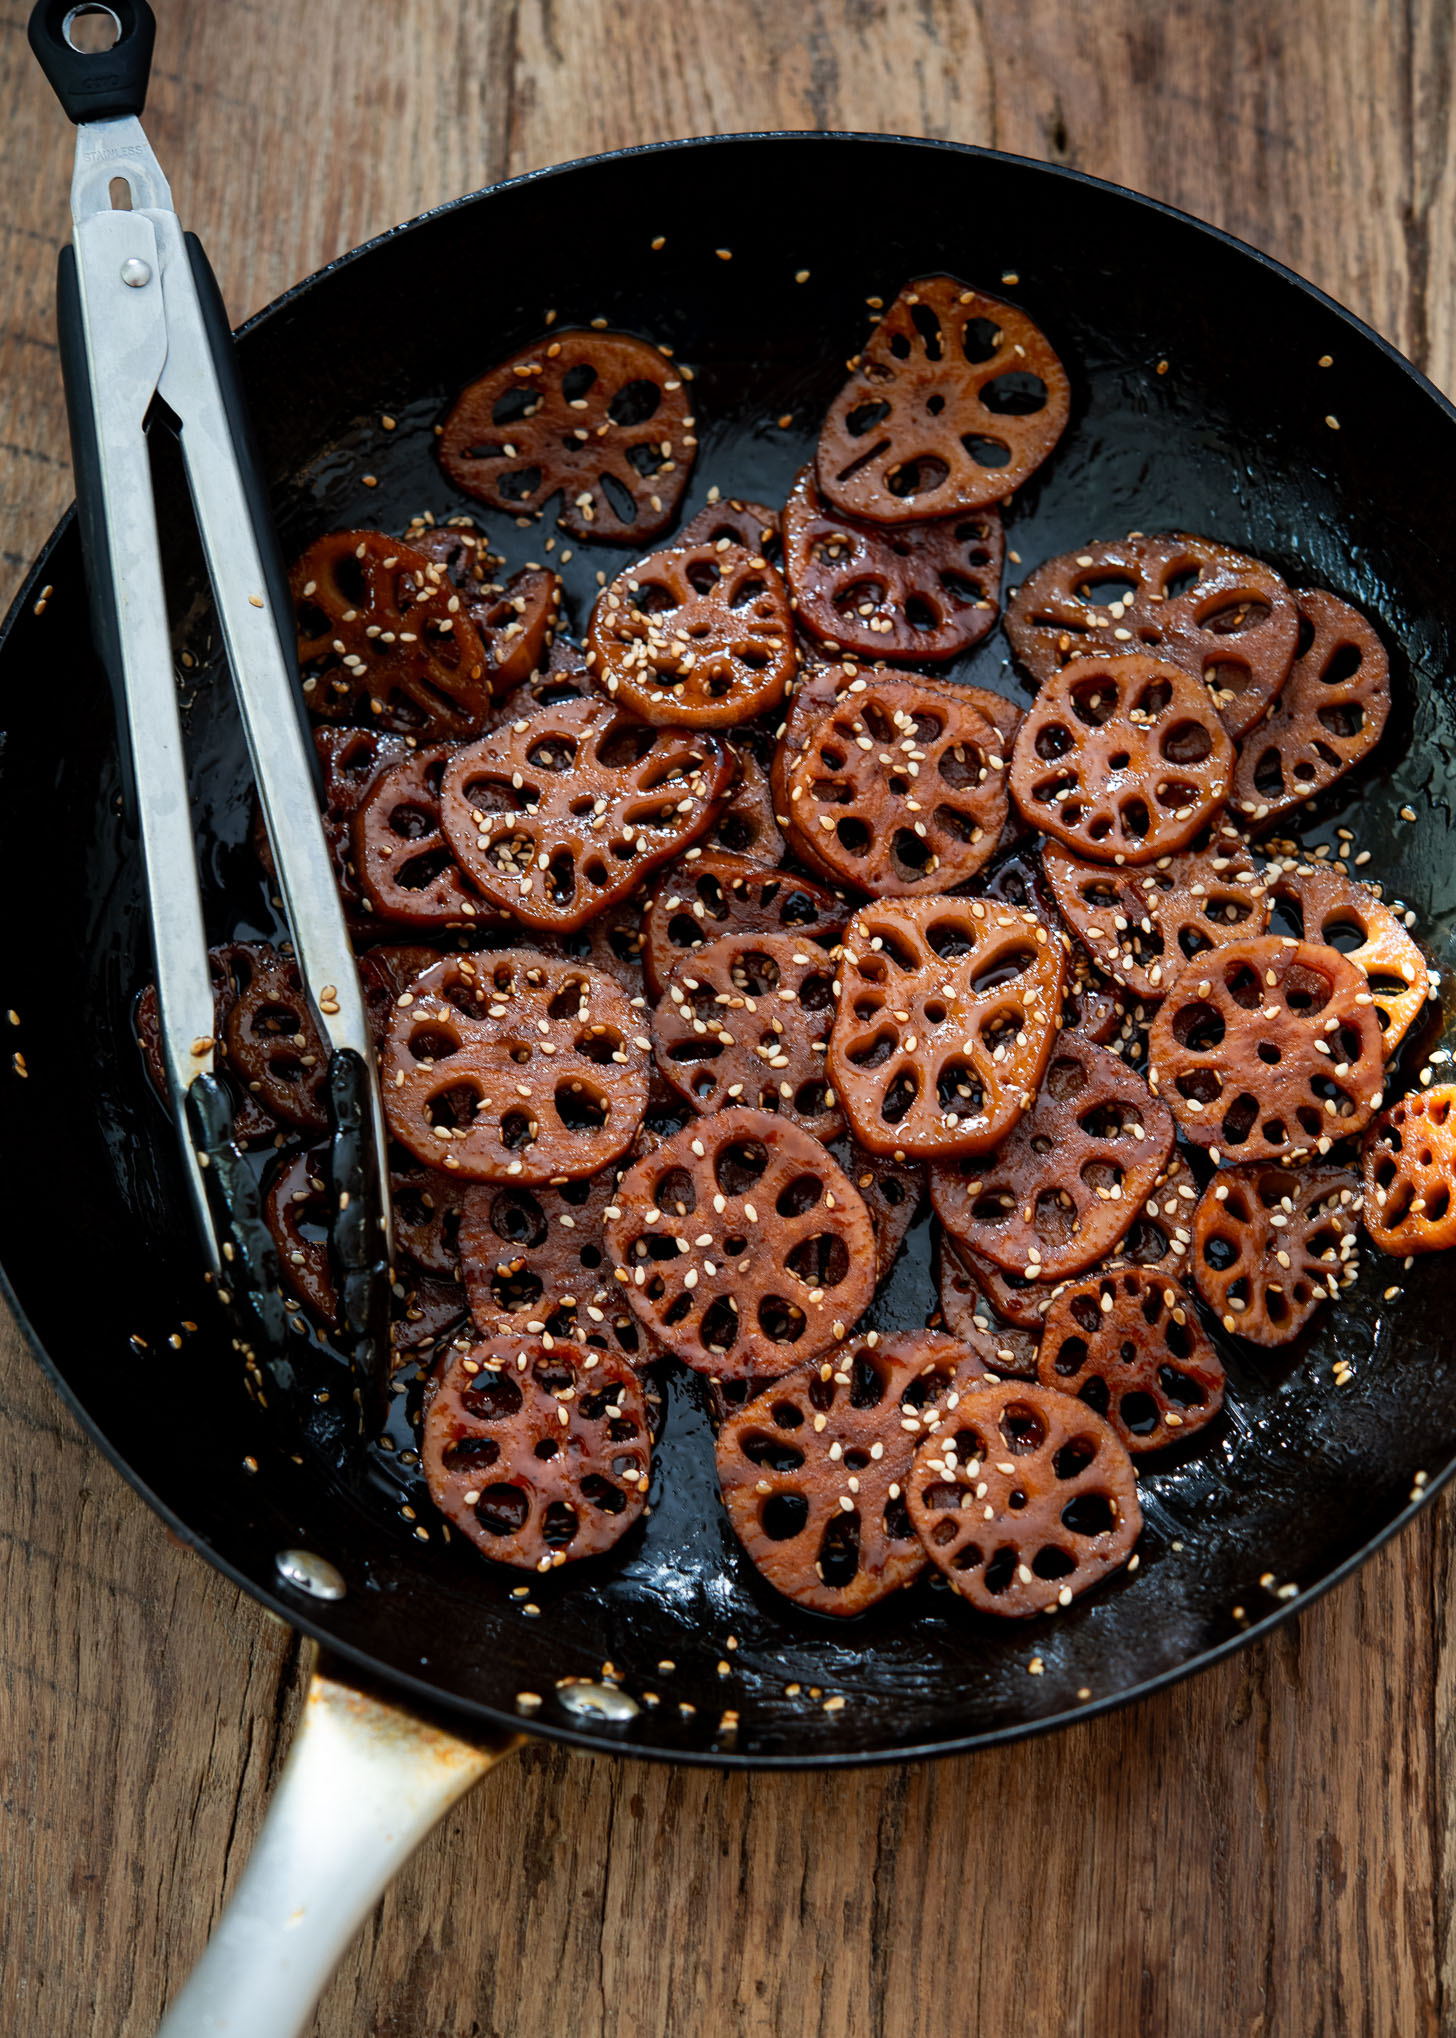 Braised and glazed lotus root side dish in a skillet